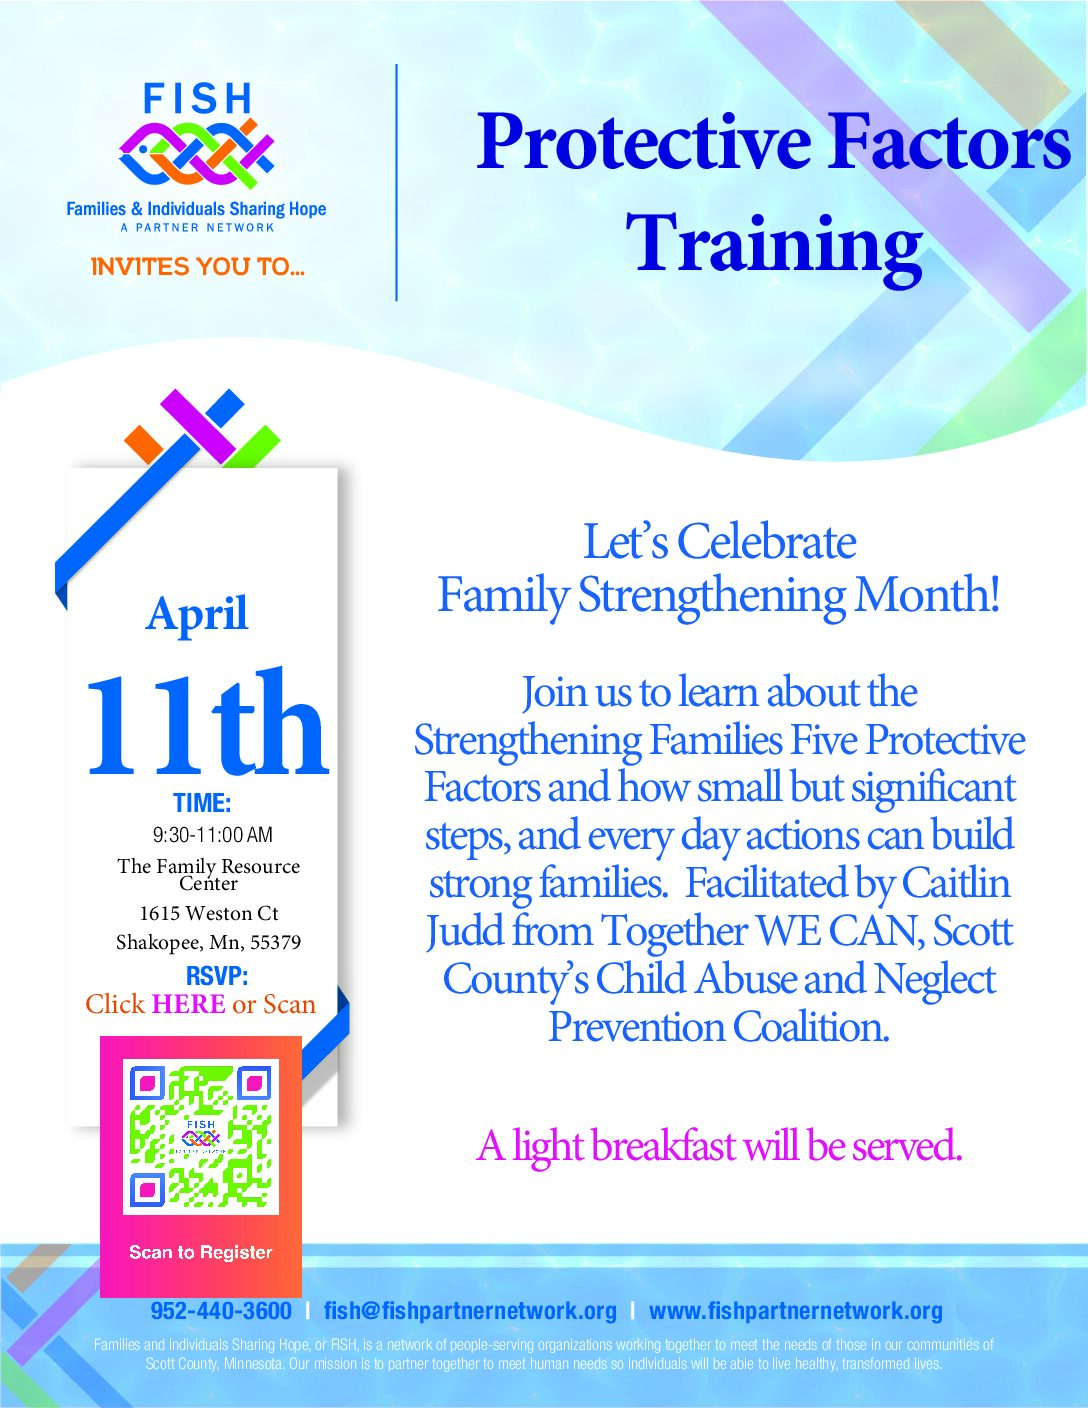 2nd Thursday Meeting on April 11th: Protective Factors Training